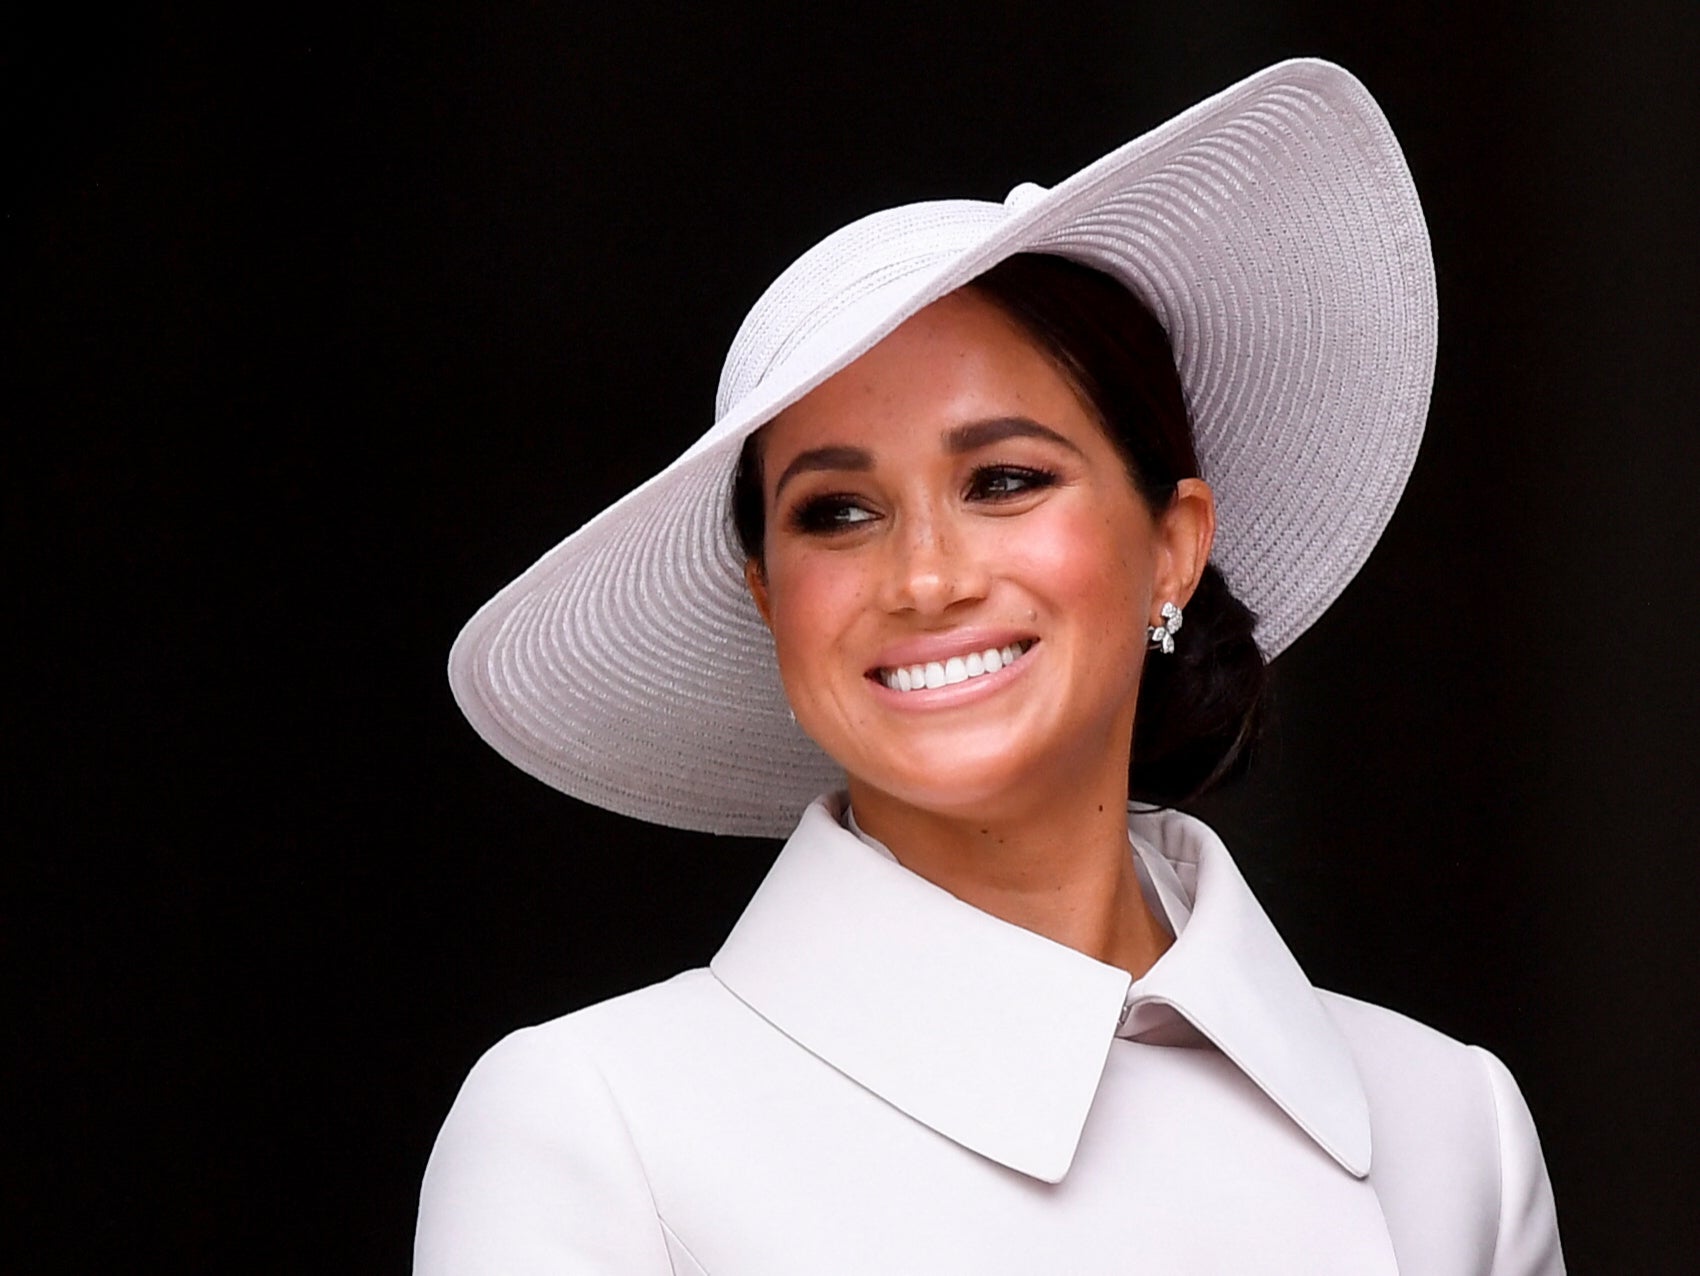 The life of Meghan Markle: From Suits star to the Duchess of Sussex | The Independent